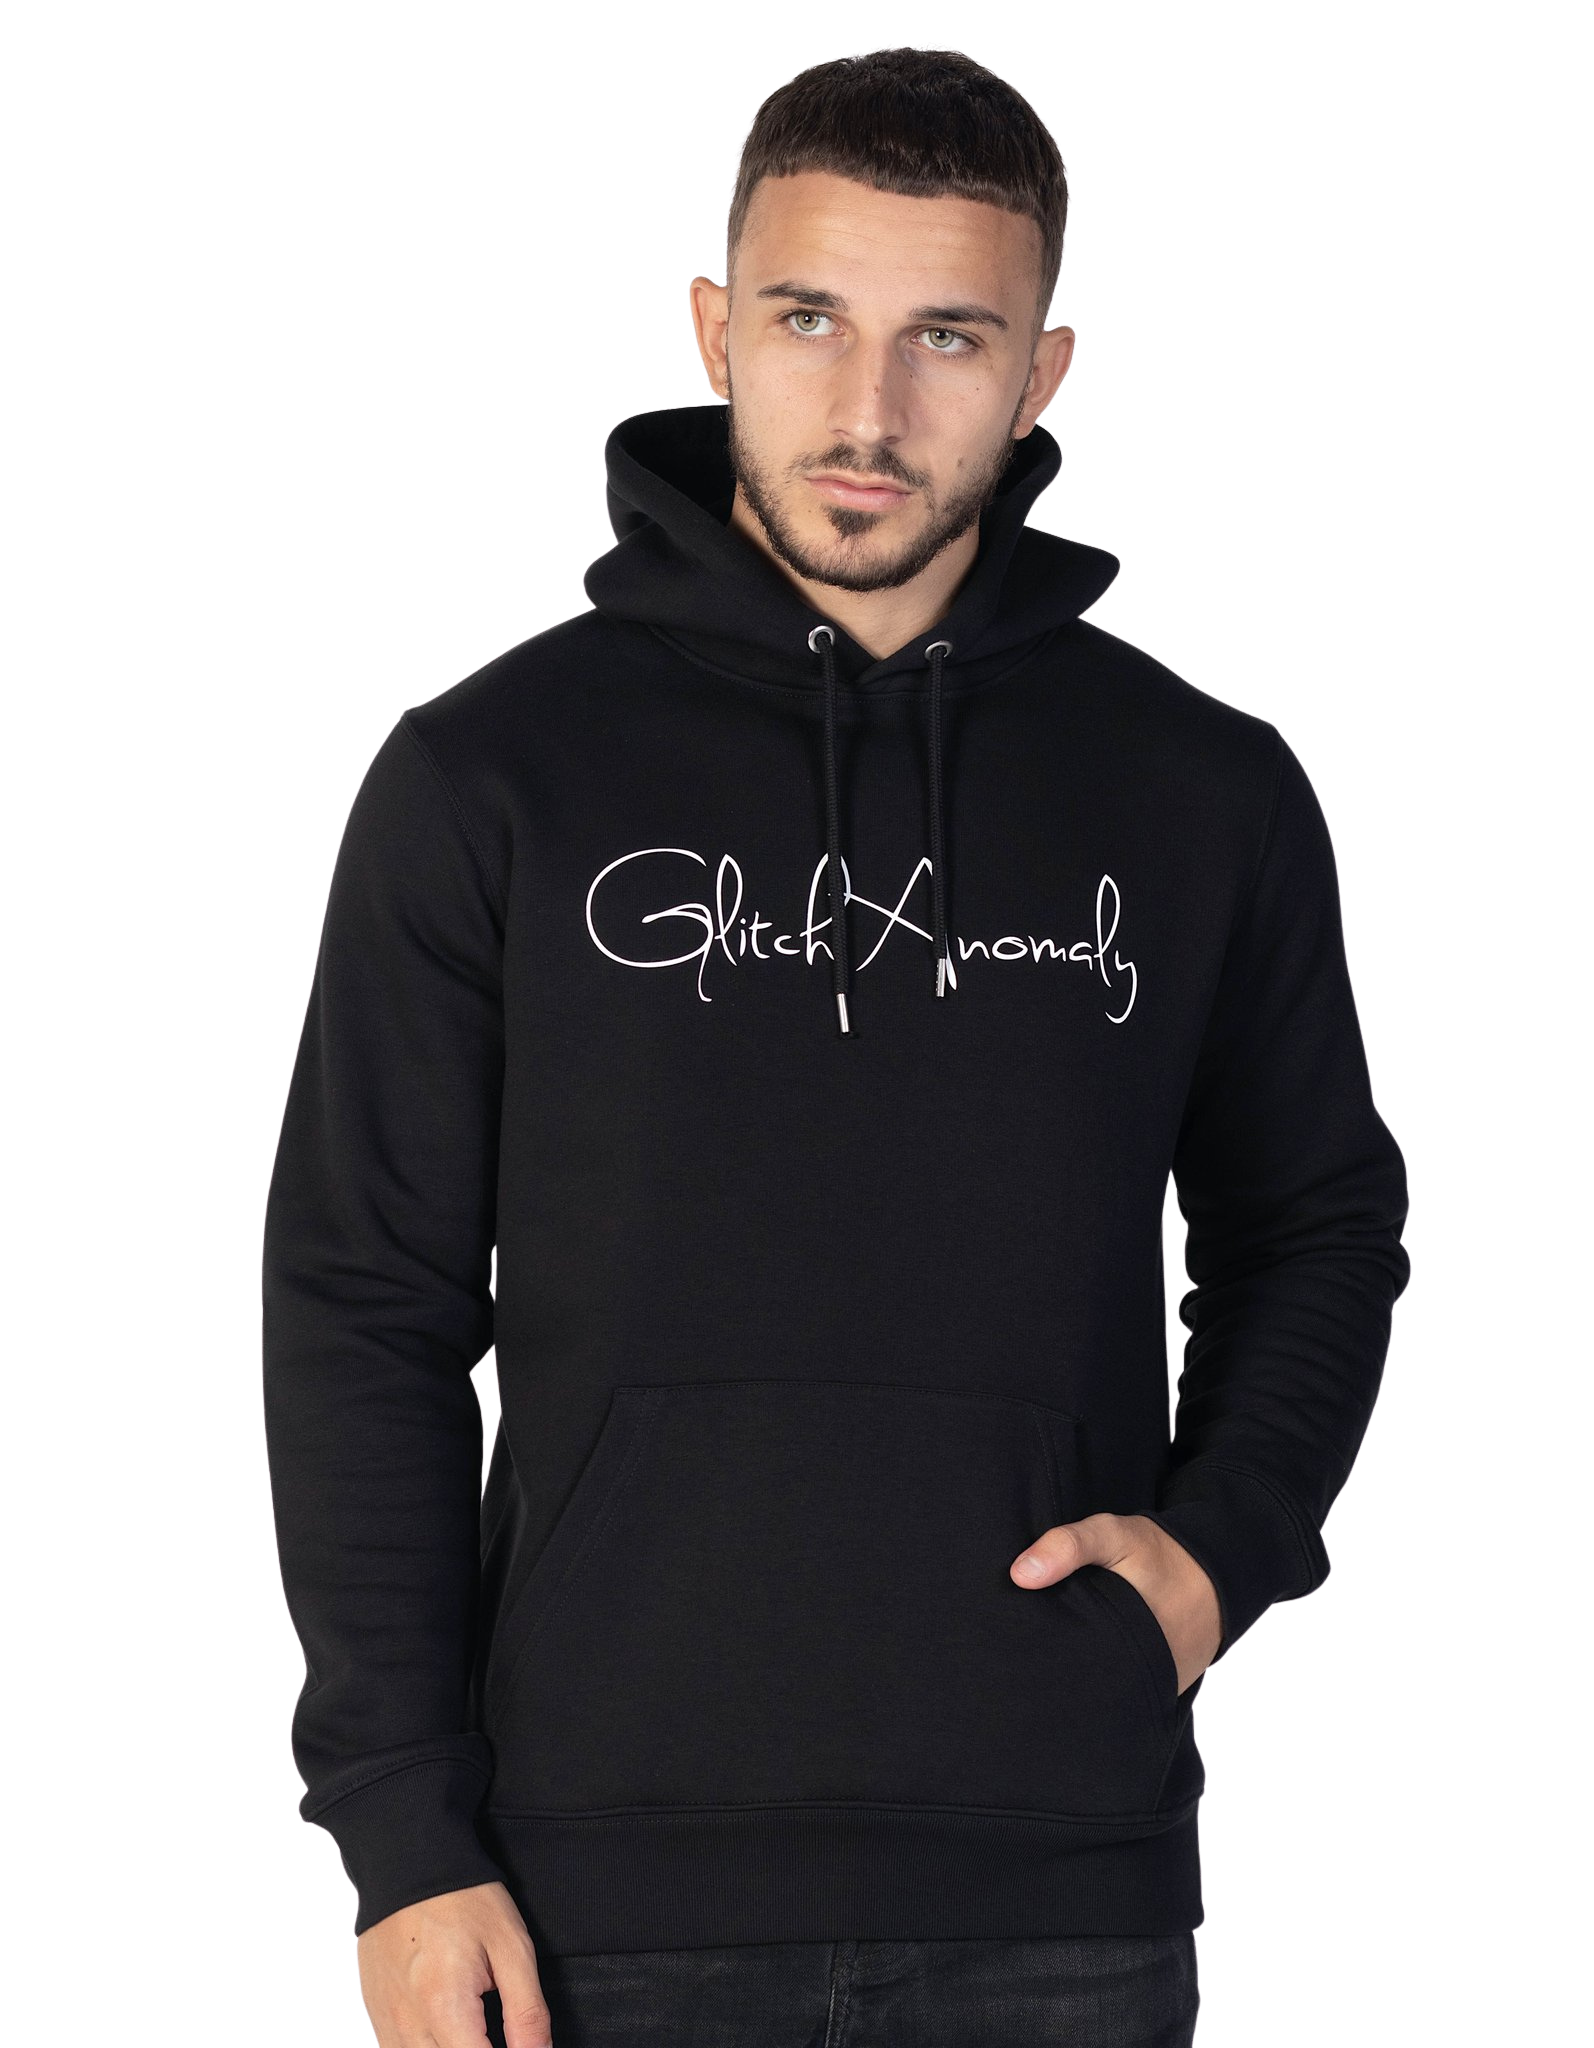 Model wearing a Black Glitch Anomaly Signature Hoodie. The model is standing in front of white background, with his left hand in the hoodie pocket and right hand by his side.